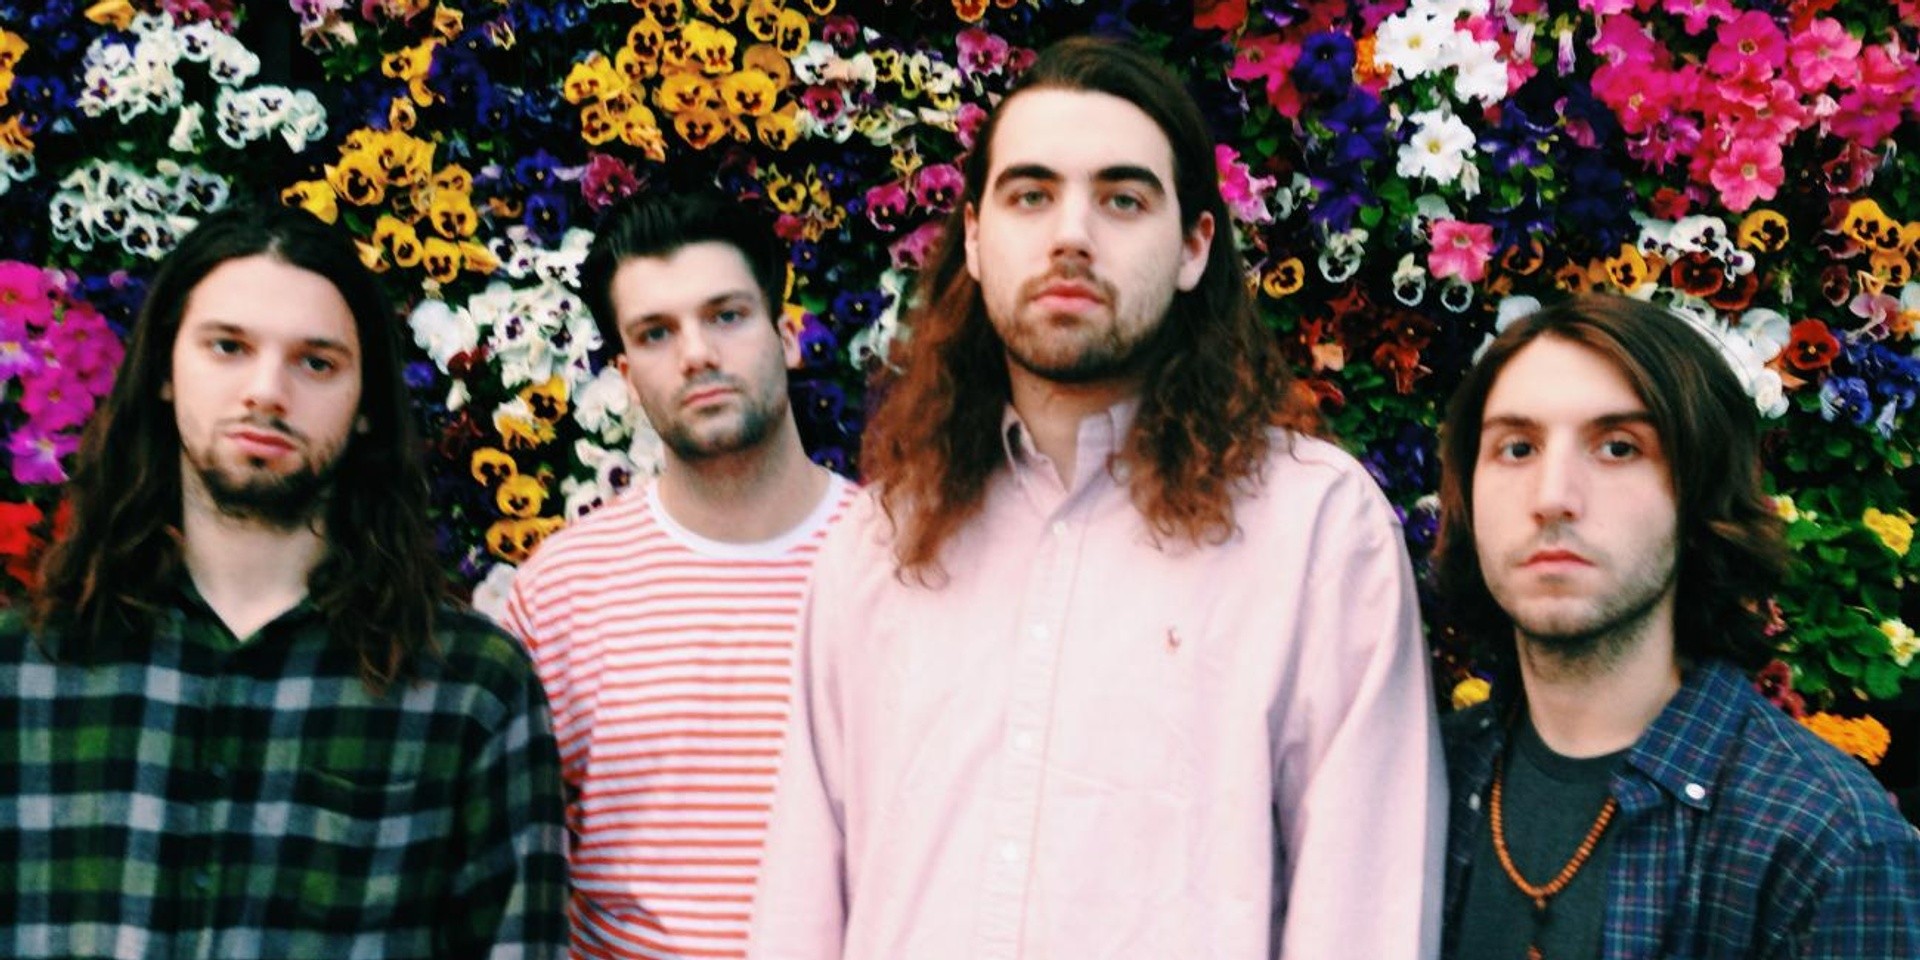 Turnover will be heading to Southeast Asia this year